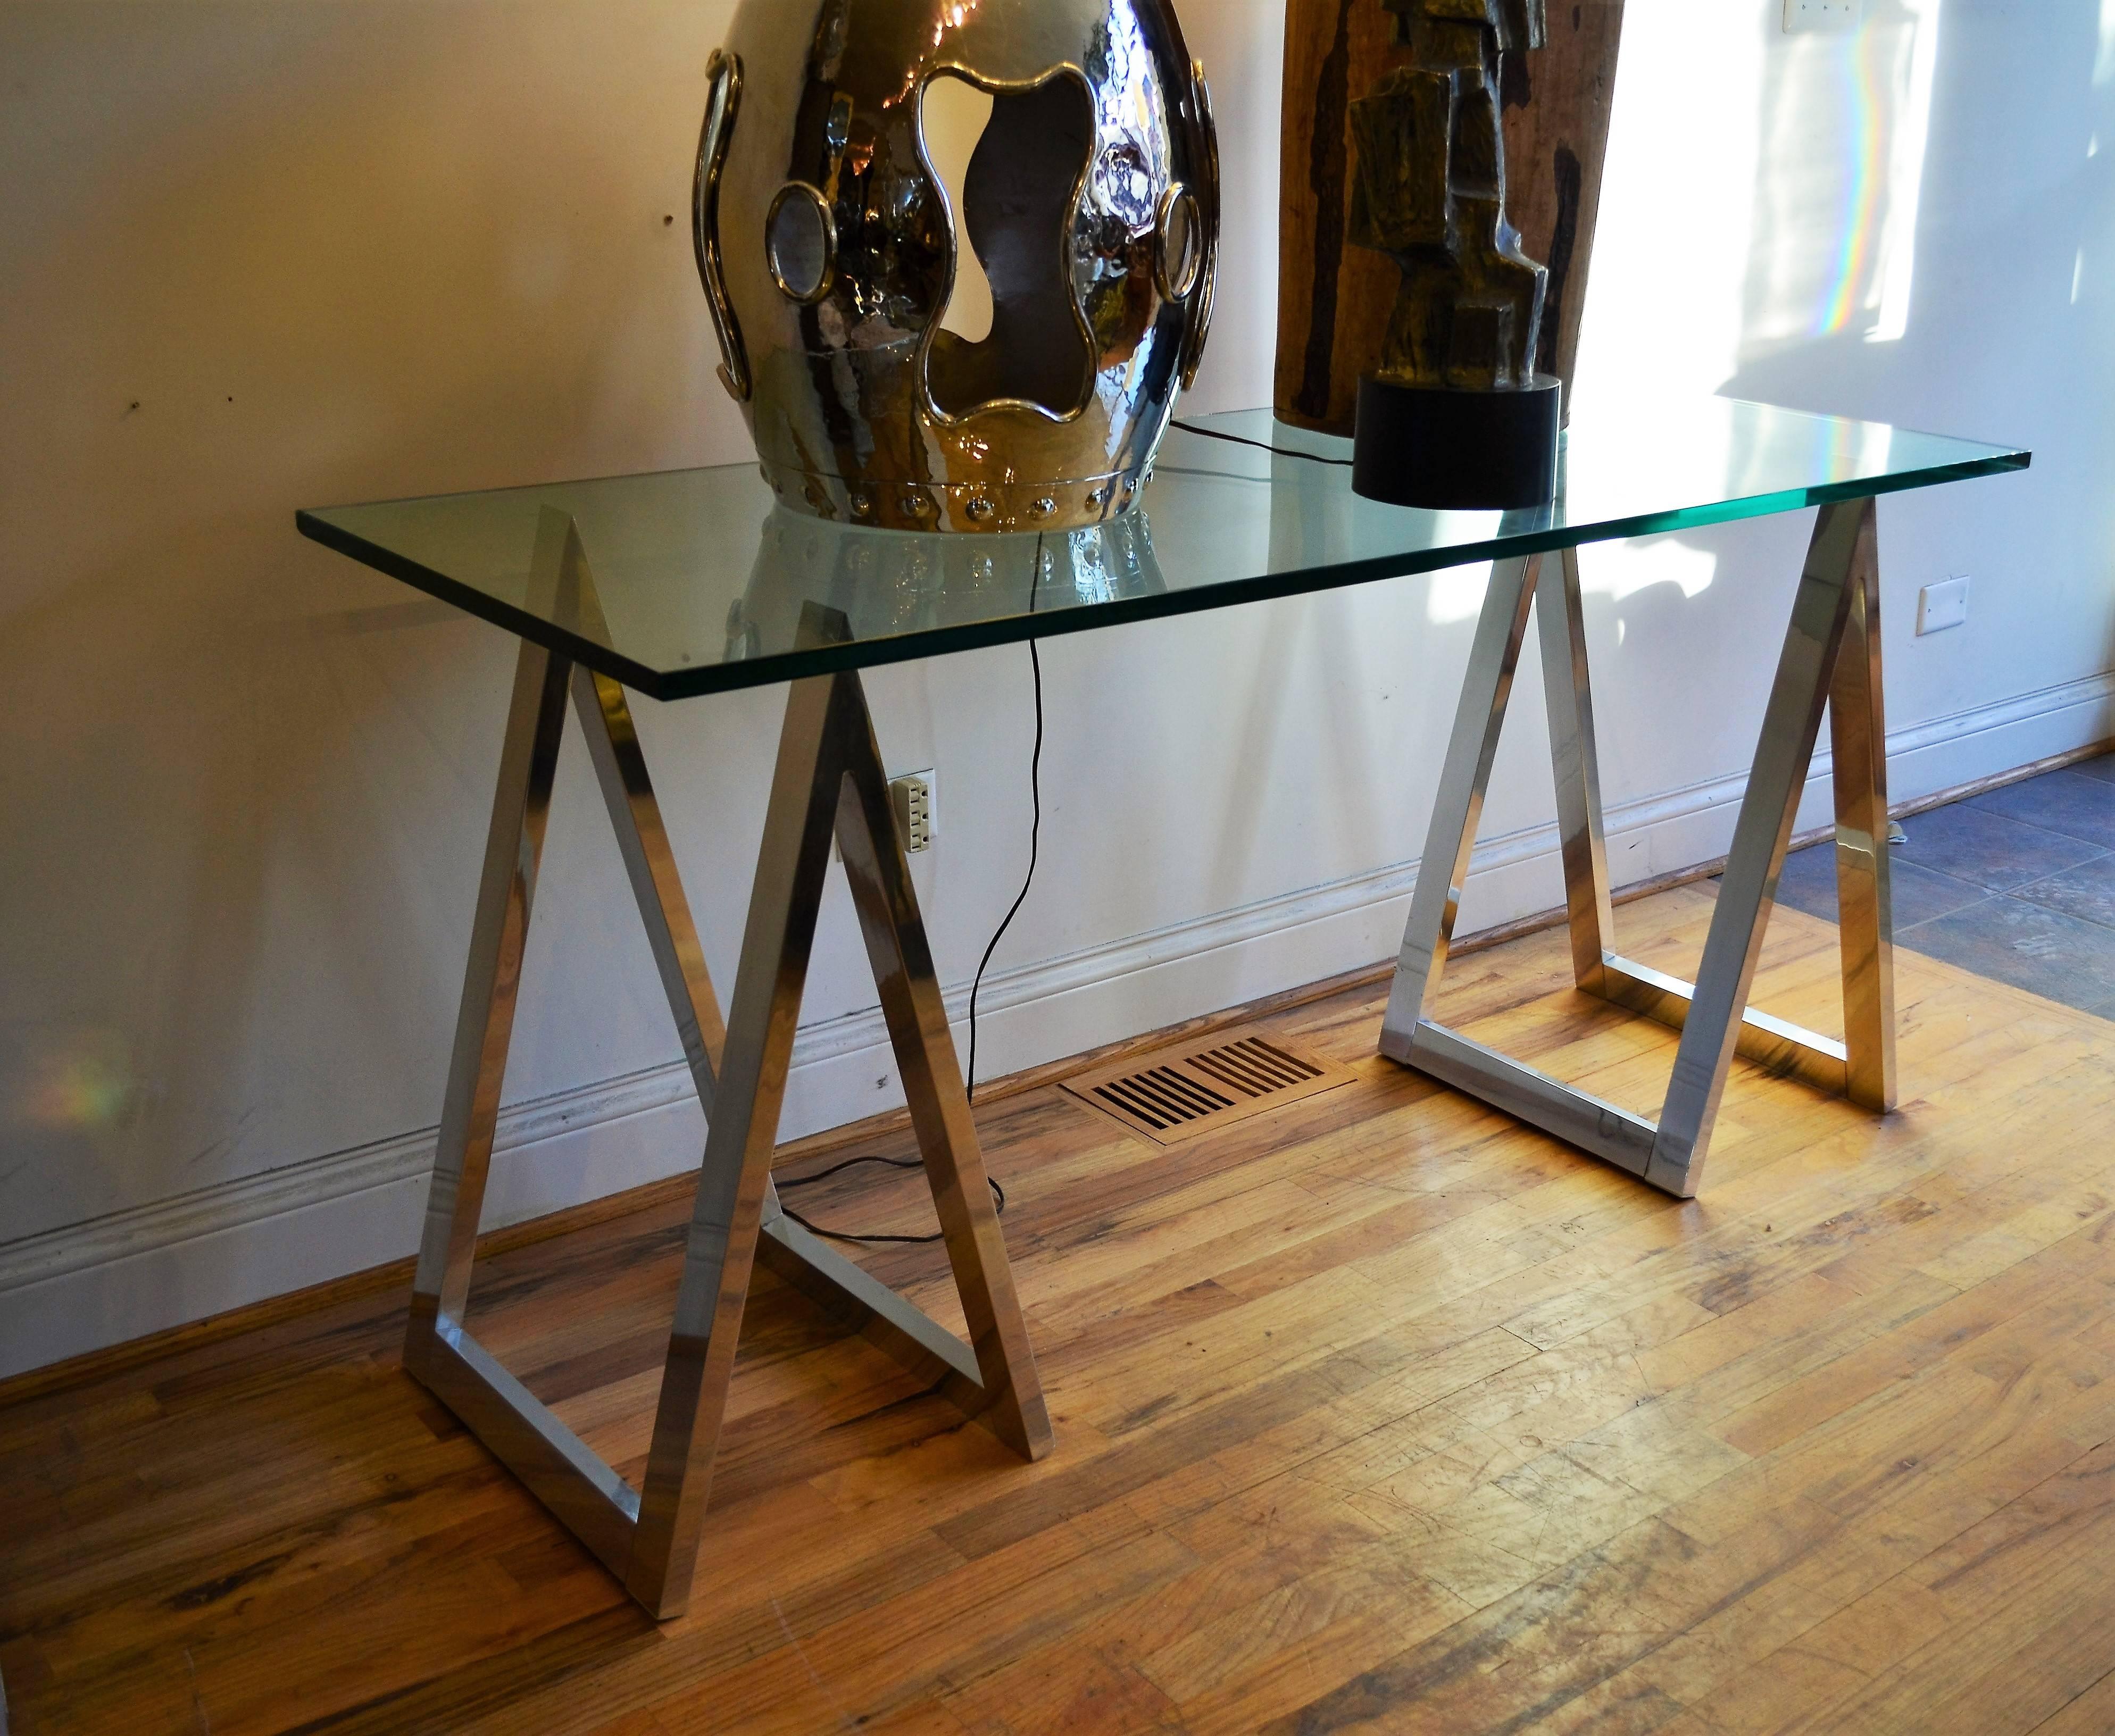 Chrome sawhorse leg console table or desk. The finest quality construction chrome and glass saw horse table by Metal Dimensions.
Fantastic original thick glass top. Great computer work table.